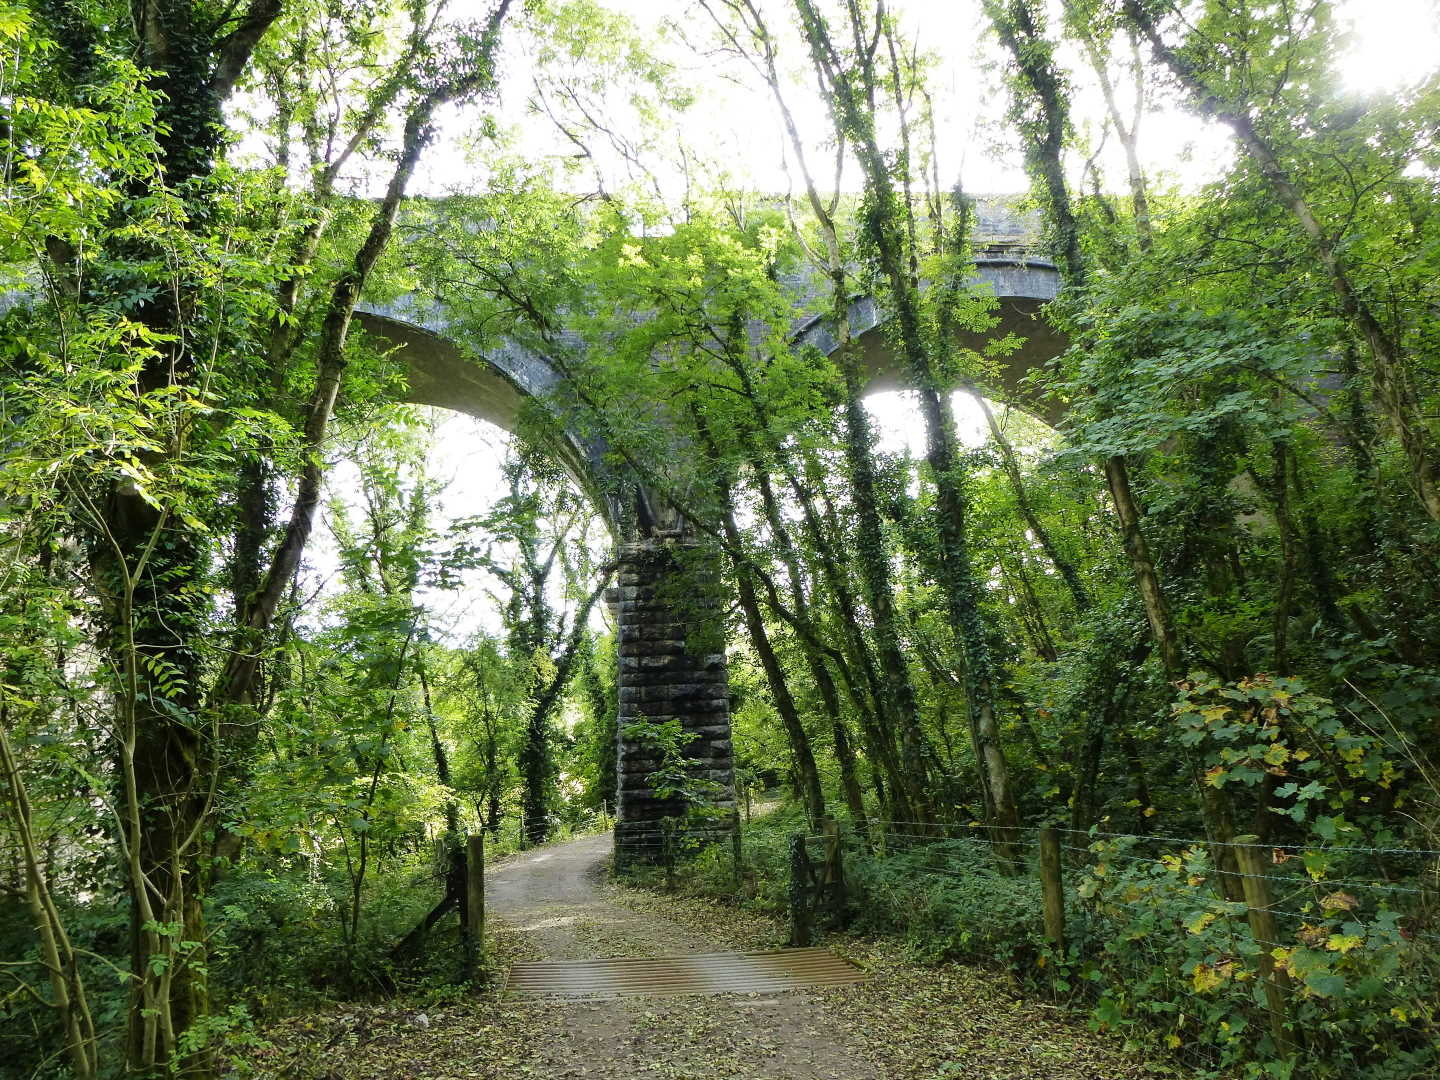 A view looking up to a viaduct through trees